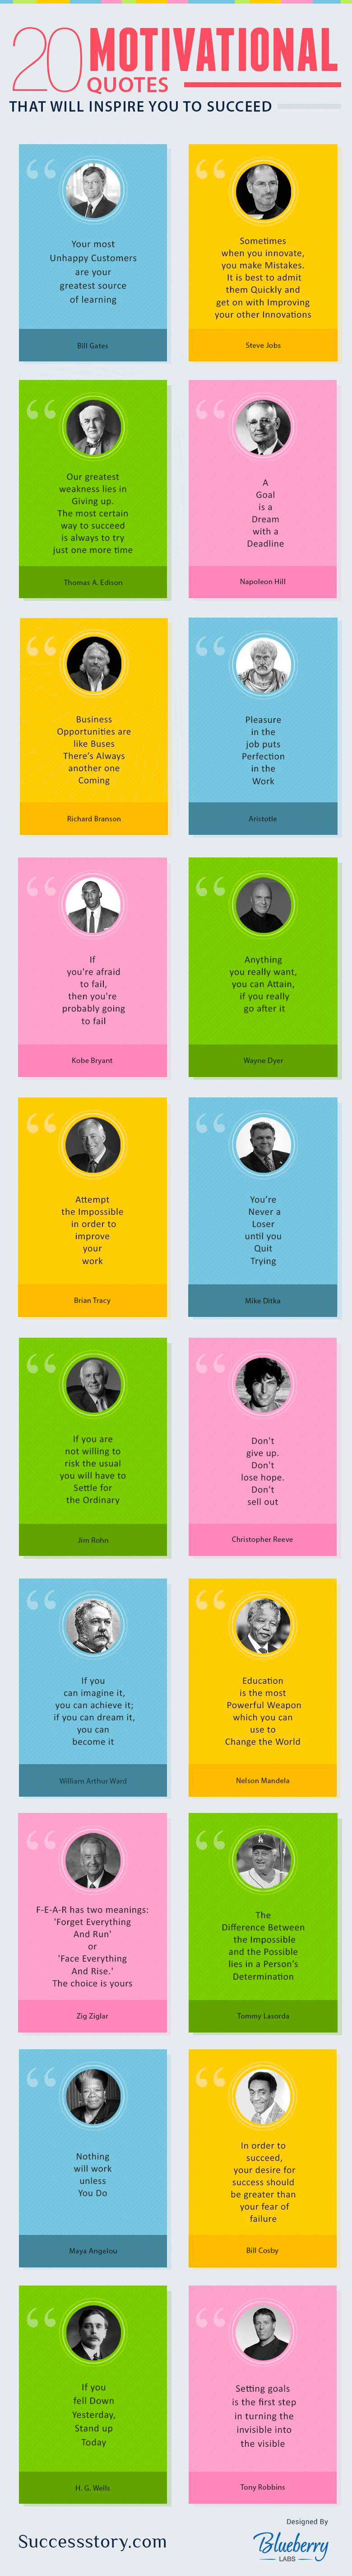 quotes from famous people about success